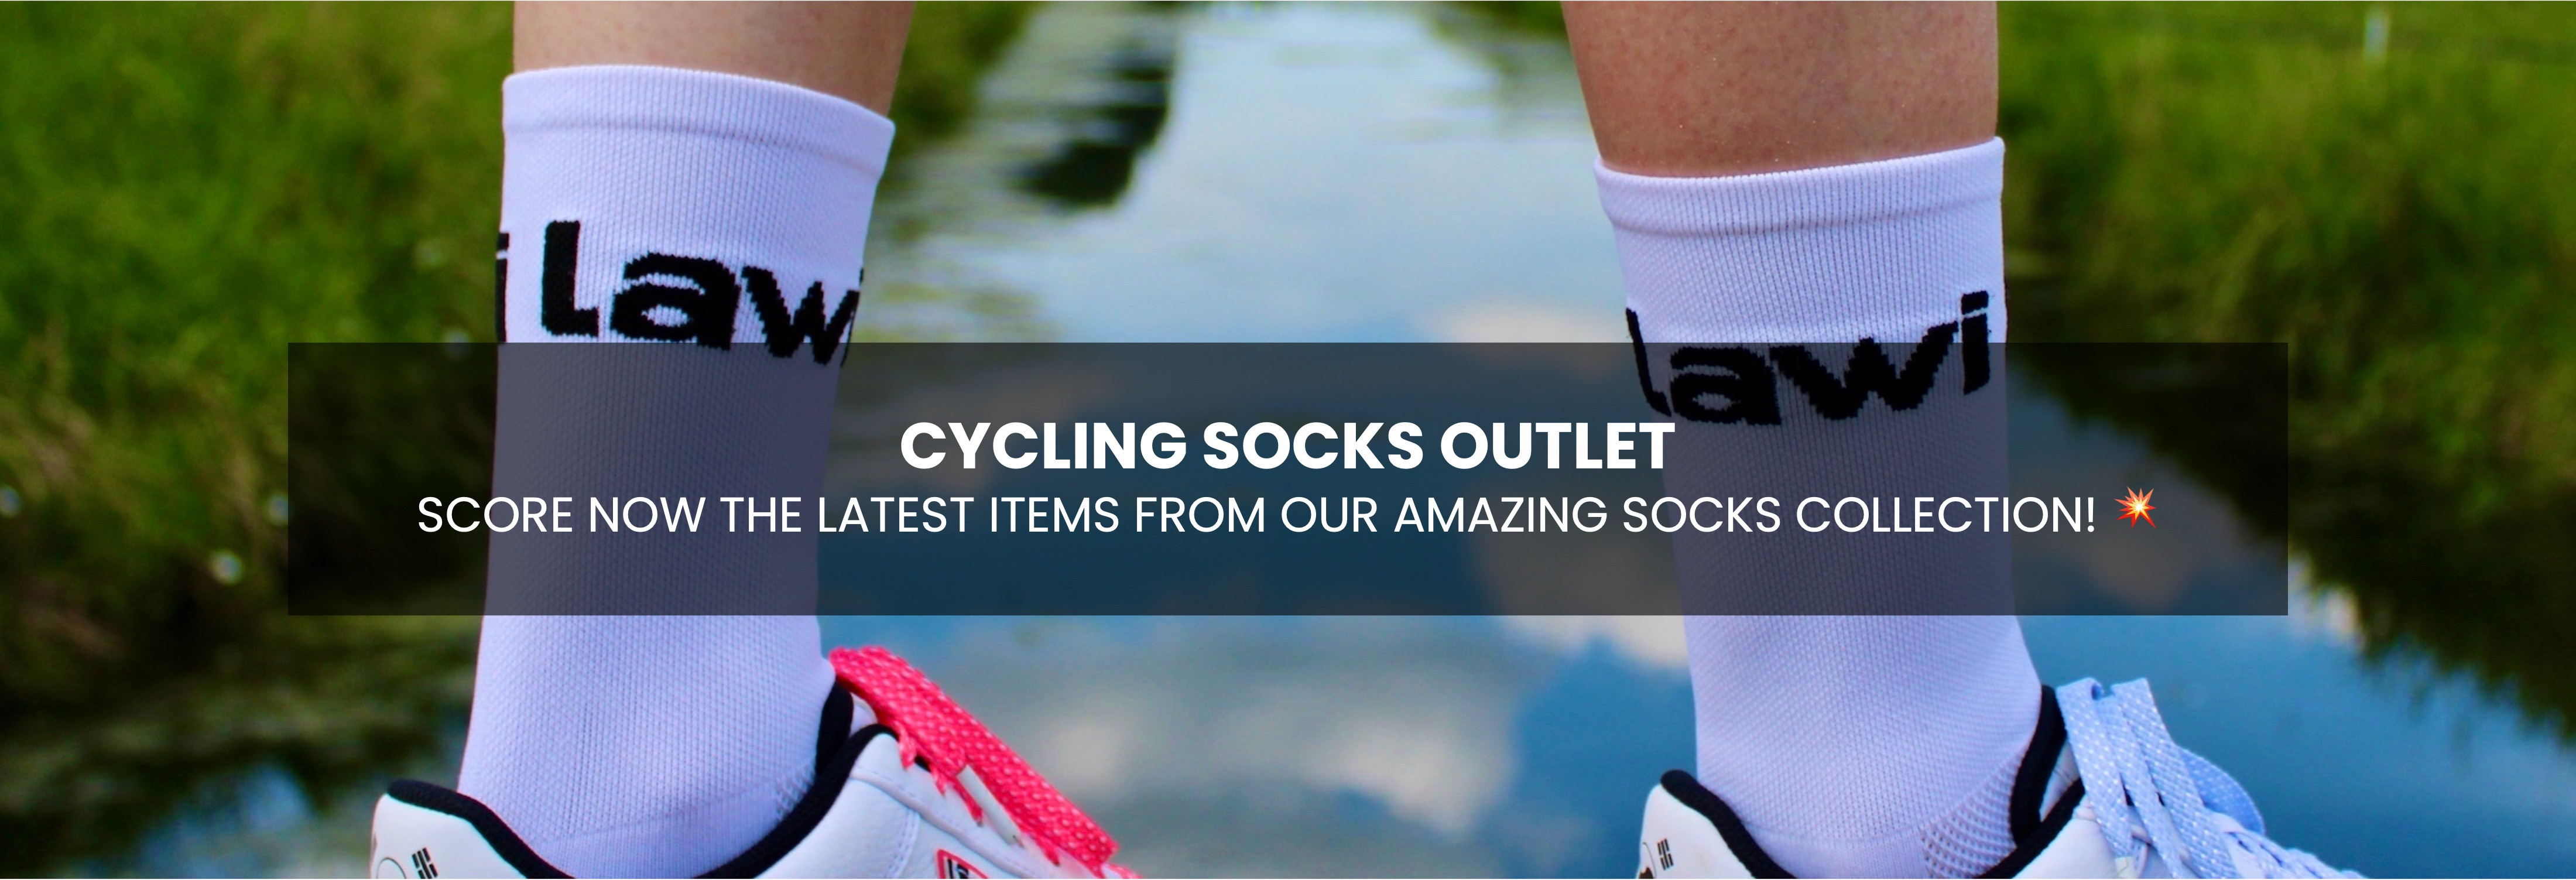 Get the latest items from our awesome socks collection now! ✅